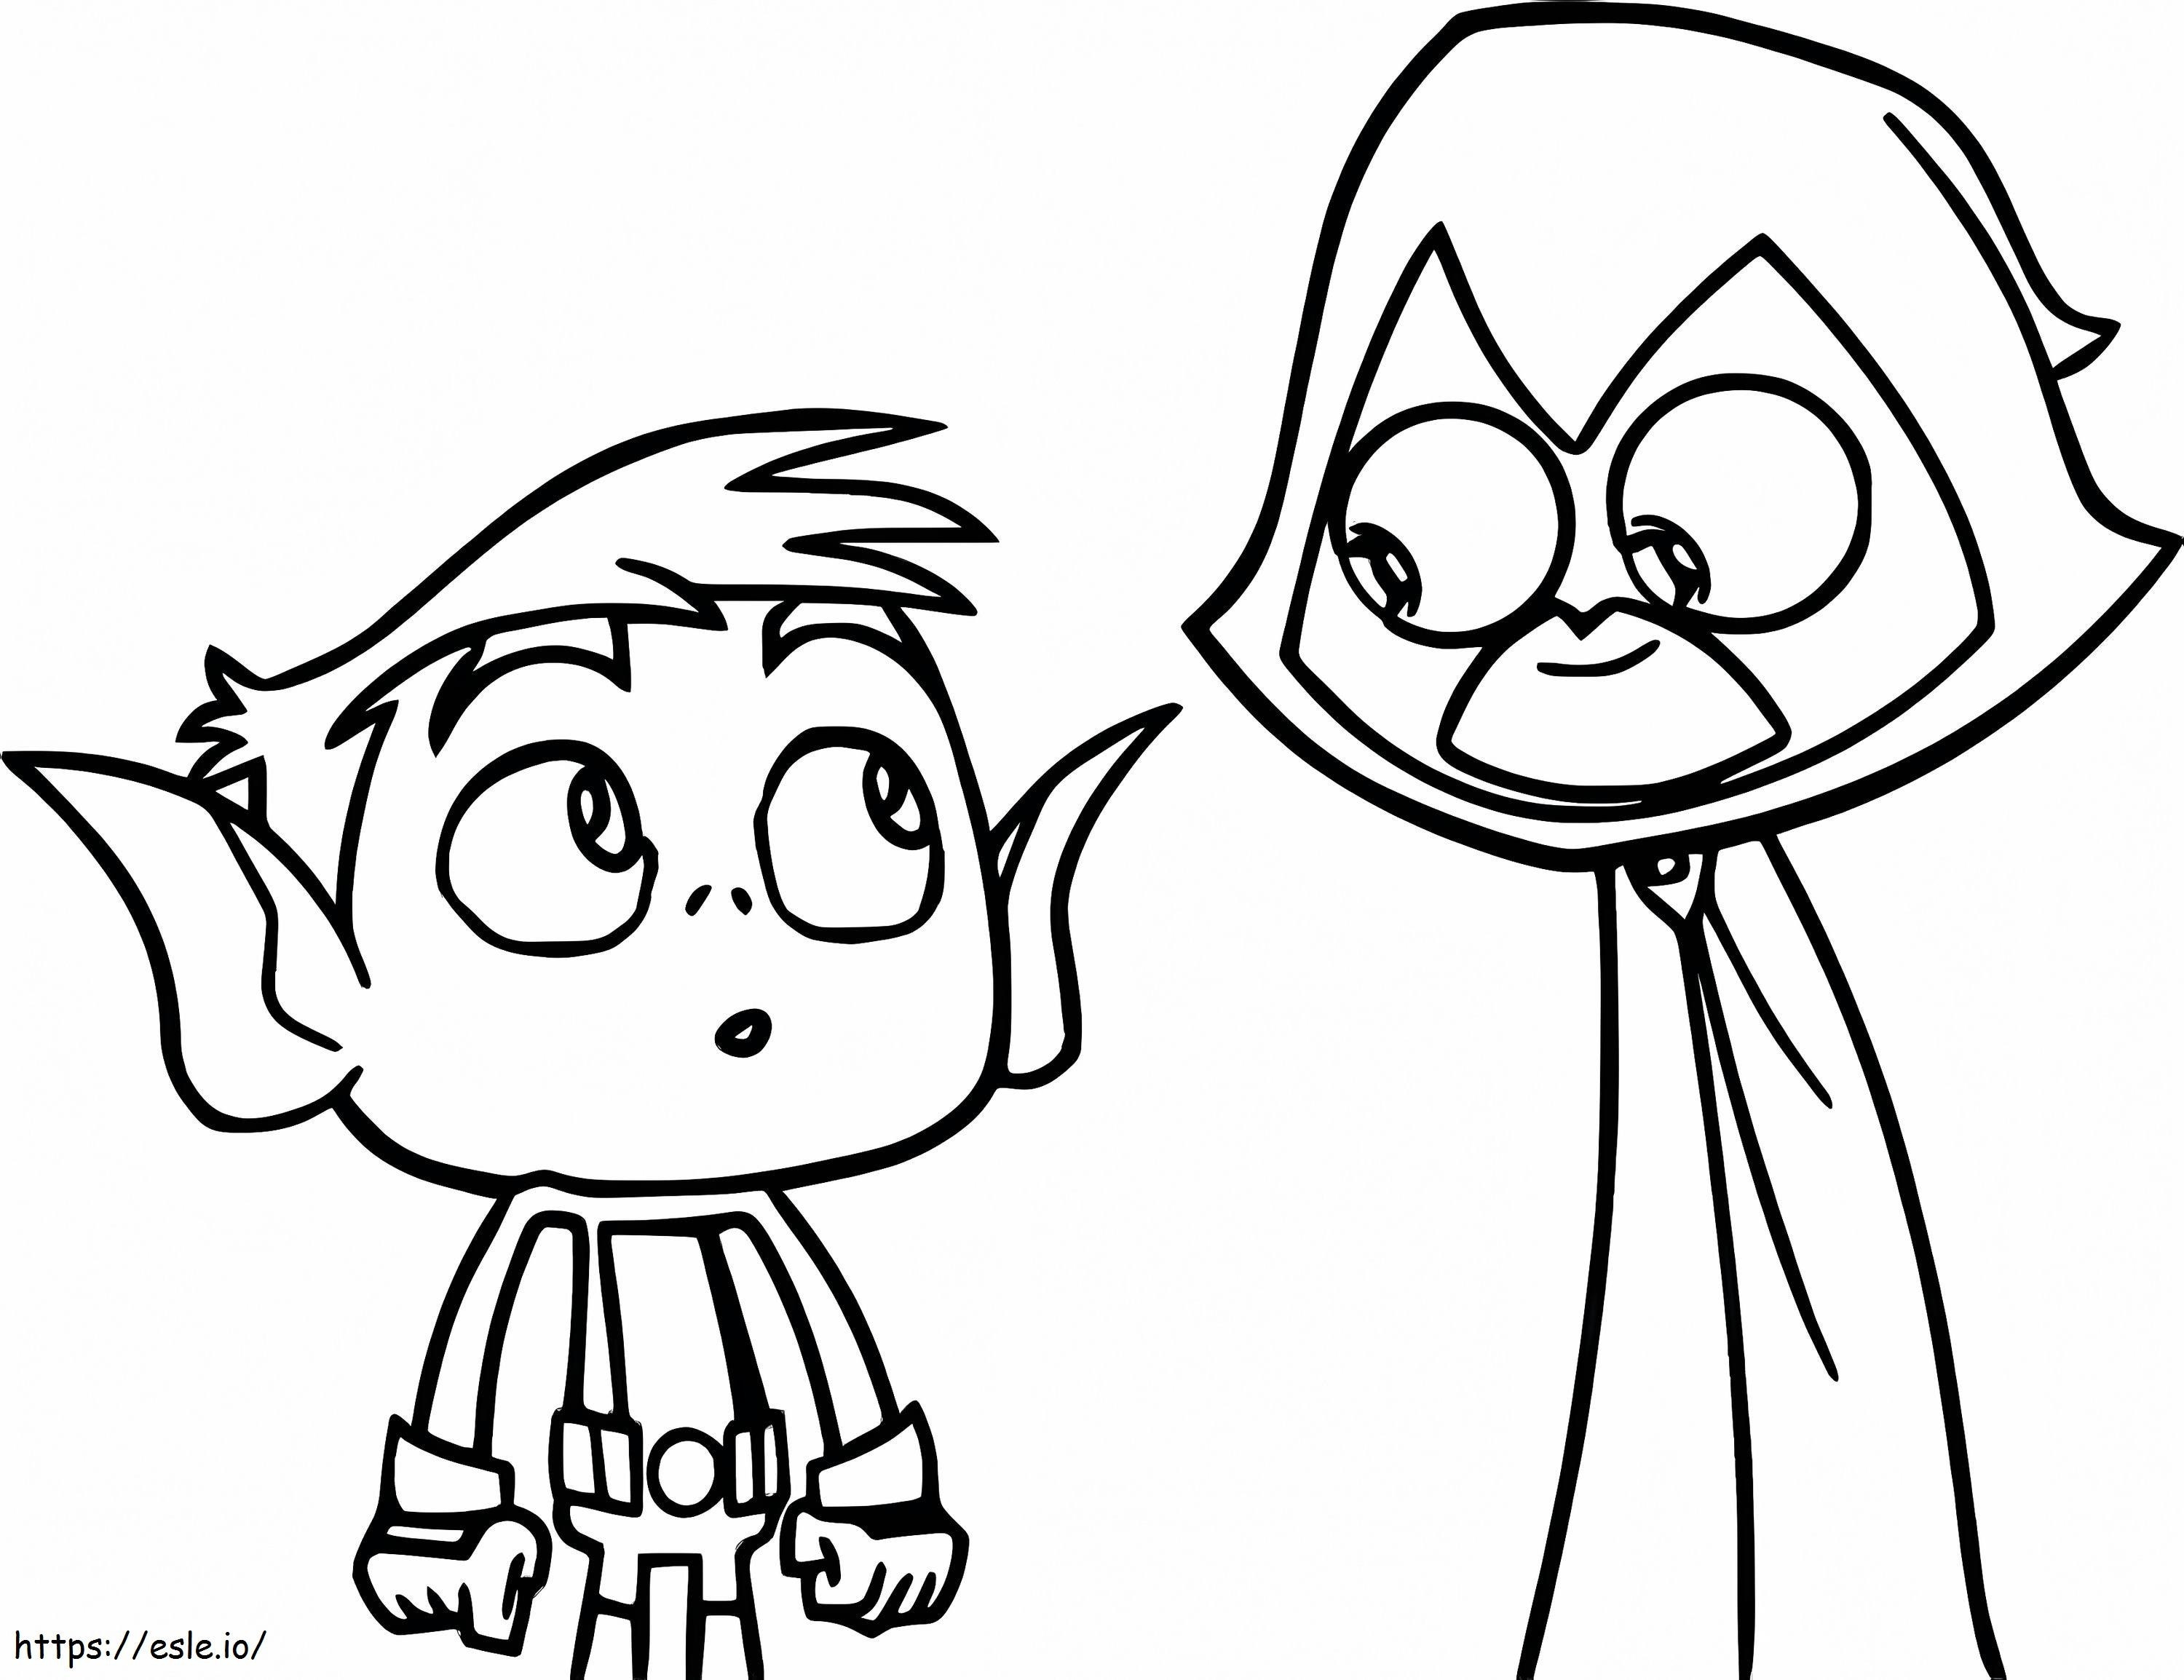 1528105409 Teen Titans Go Raven And Beast Boy coloring page